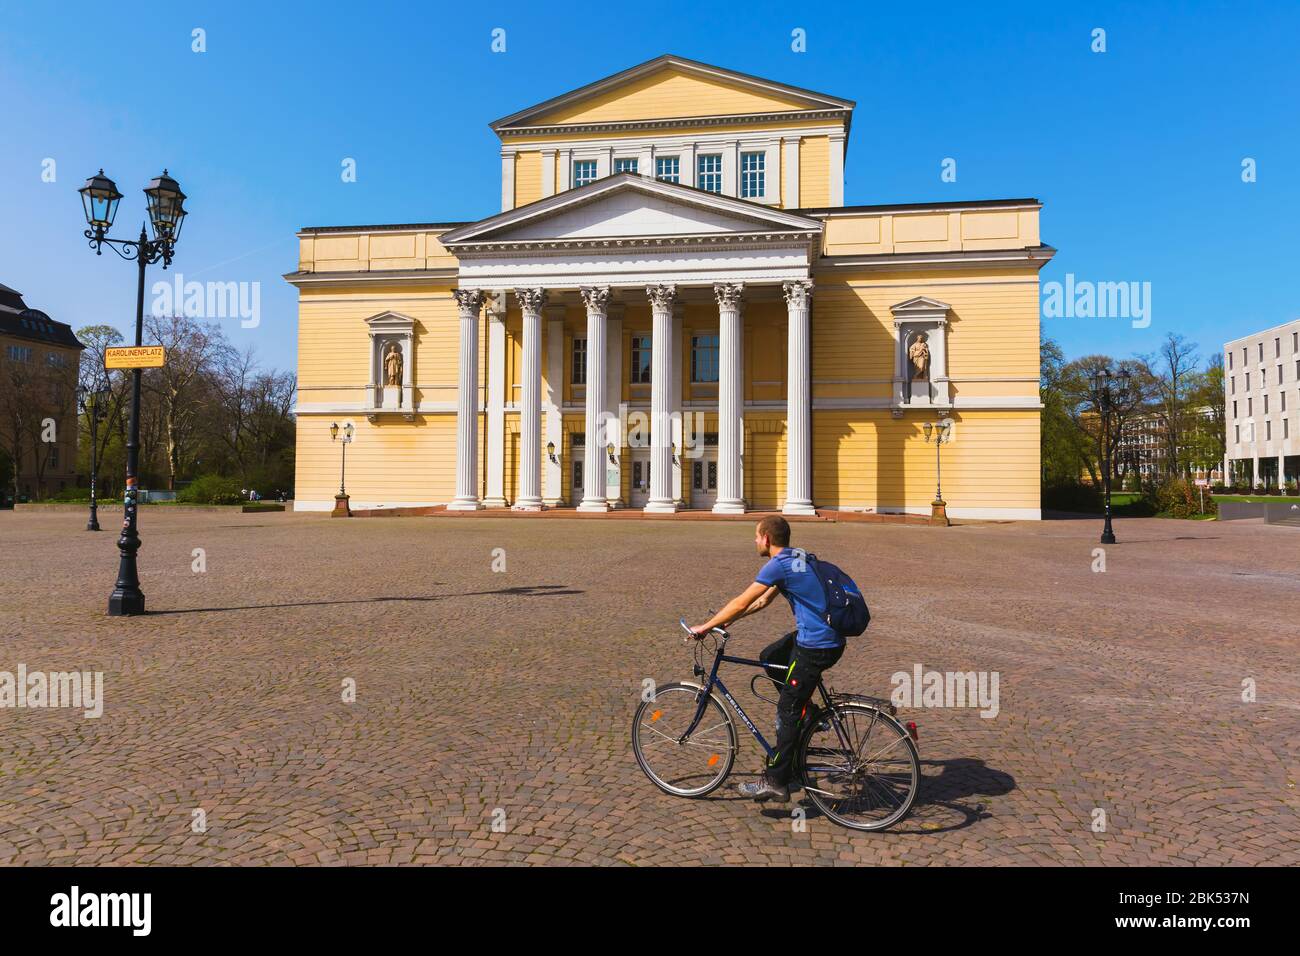 Darmstadt, Germany - April 08, 2018: House of History with unidentified people. Originally erected in 1817 in classical style, it was destroyed in 2. Stock Photo